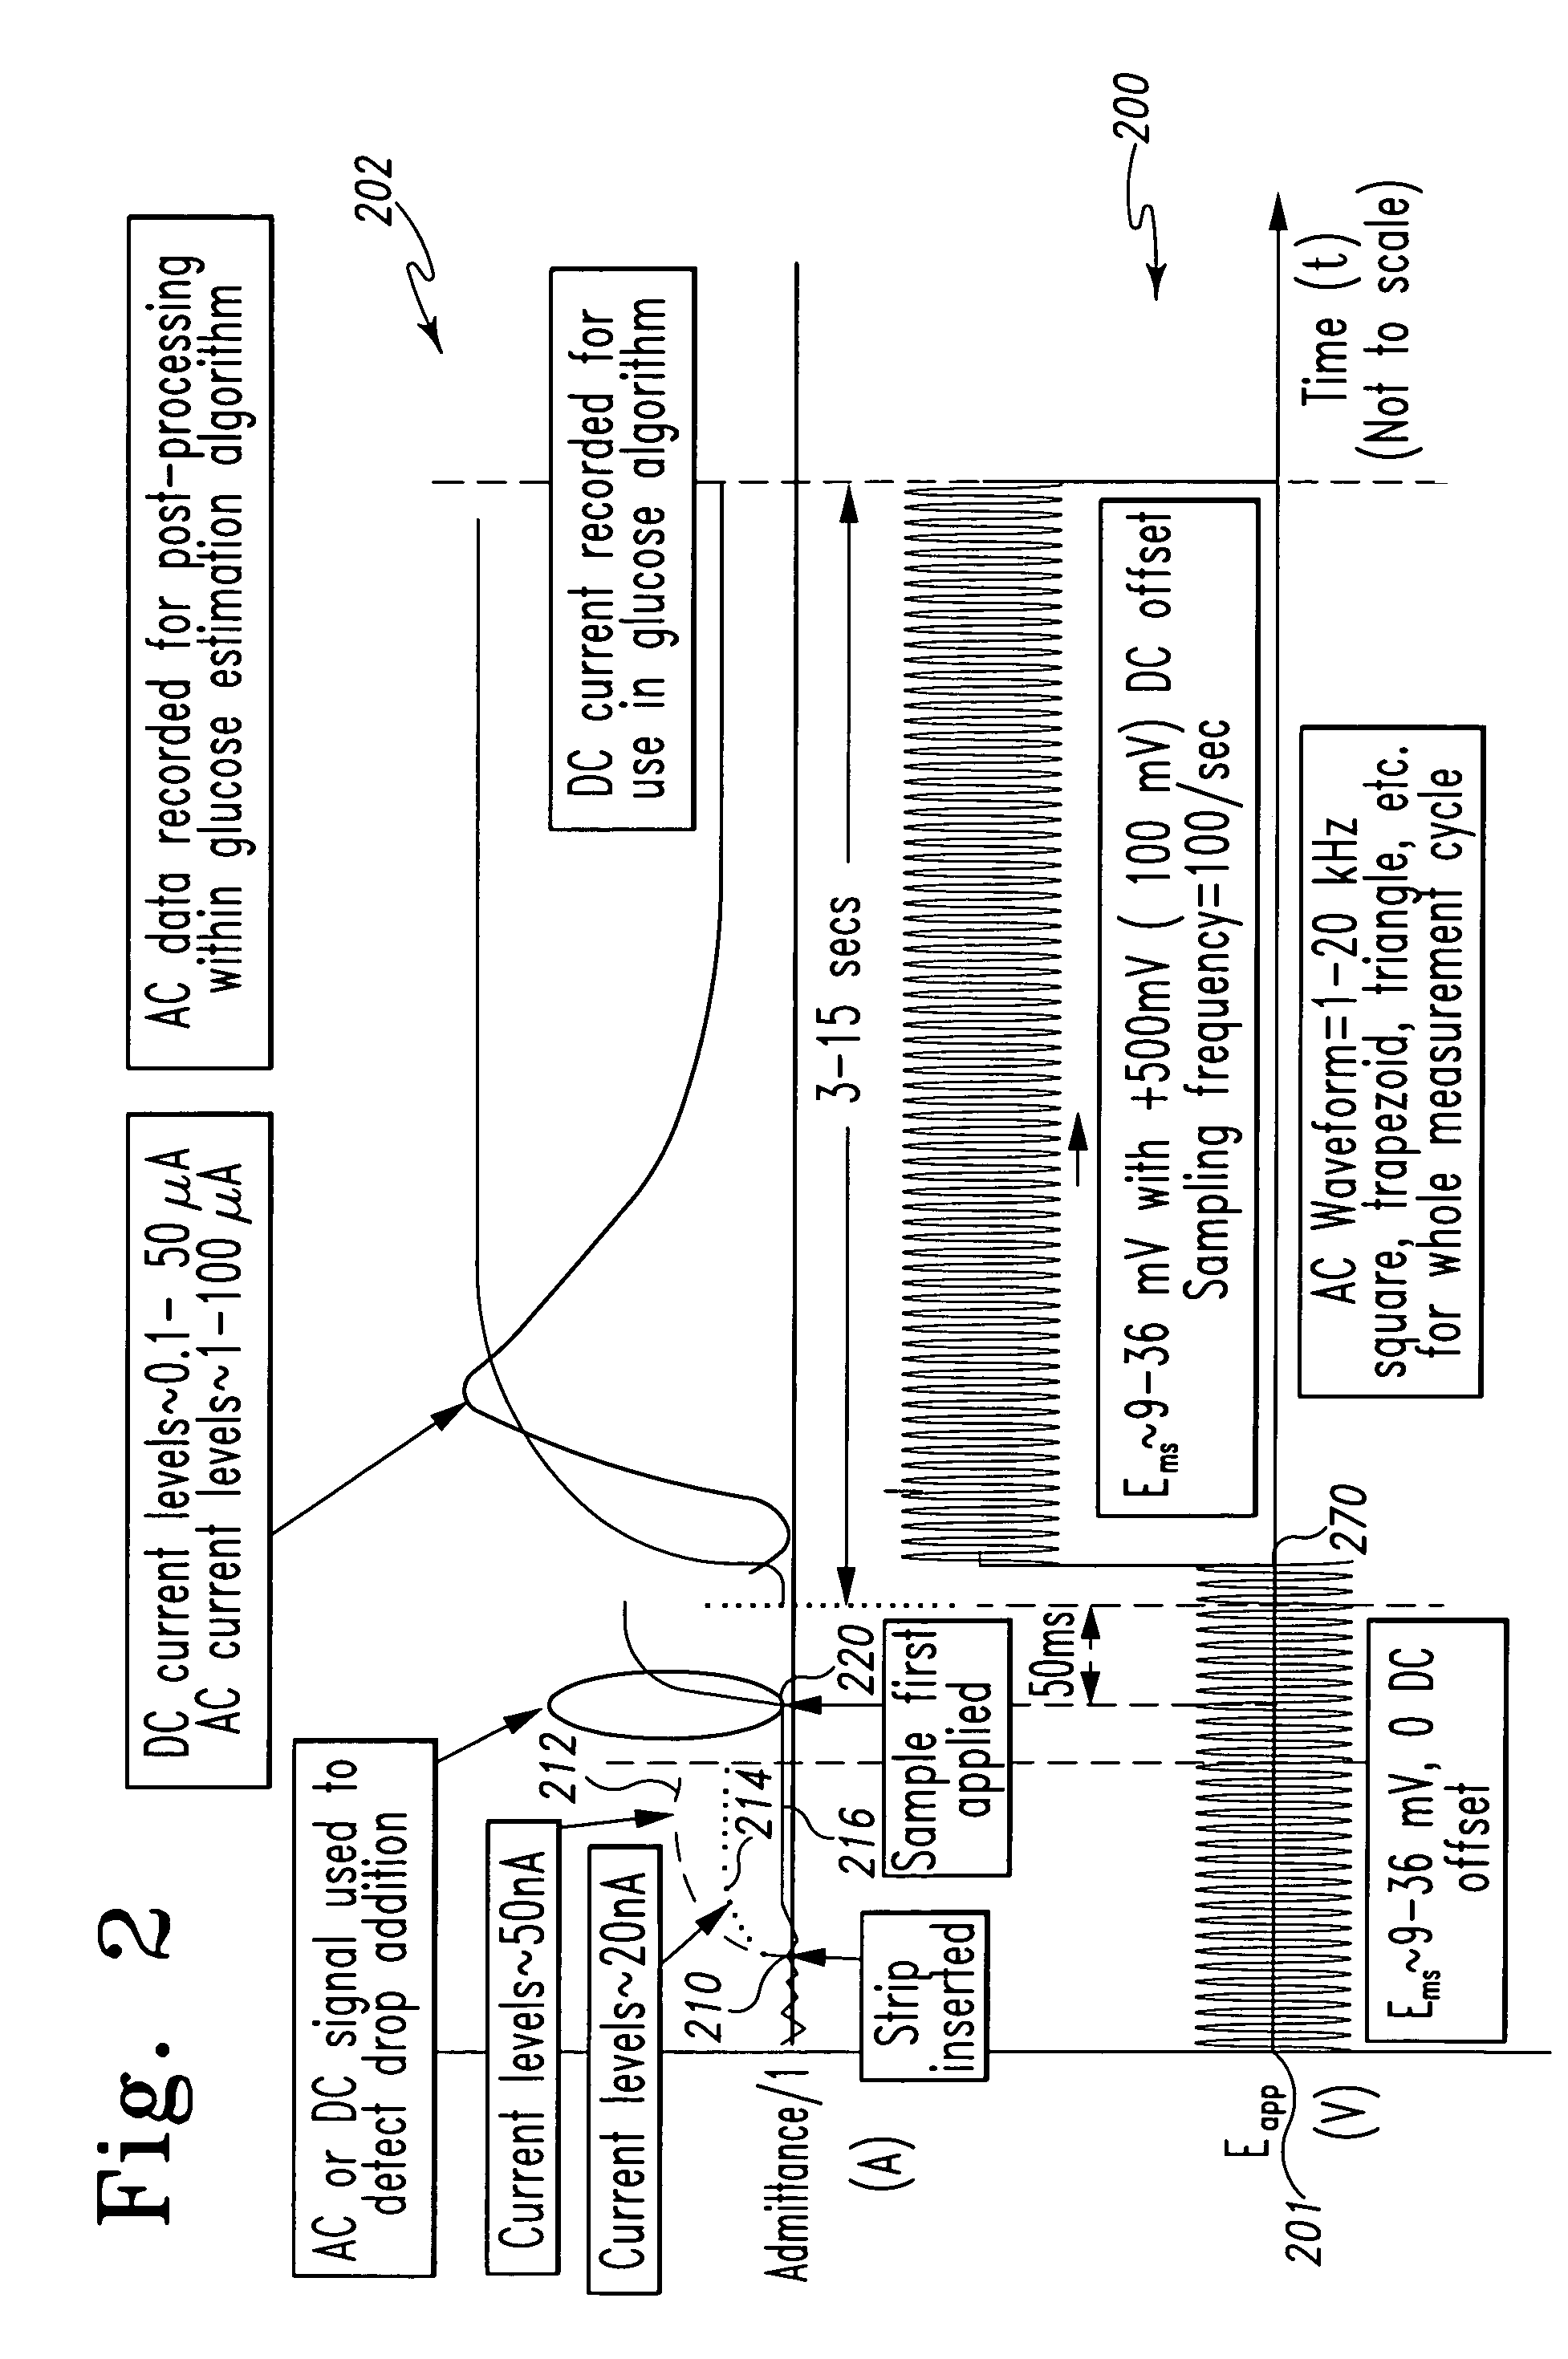 System and method for analyte measurement using AC phase angle measurements